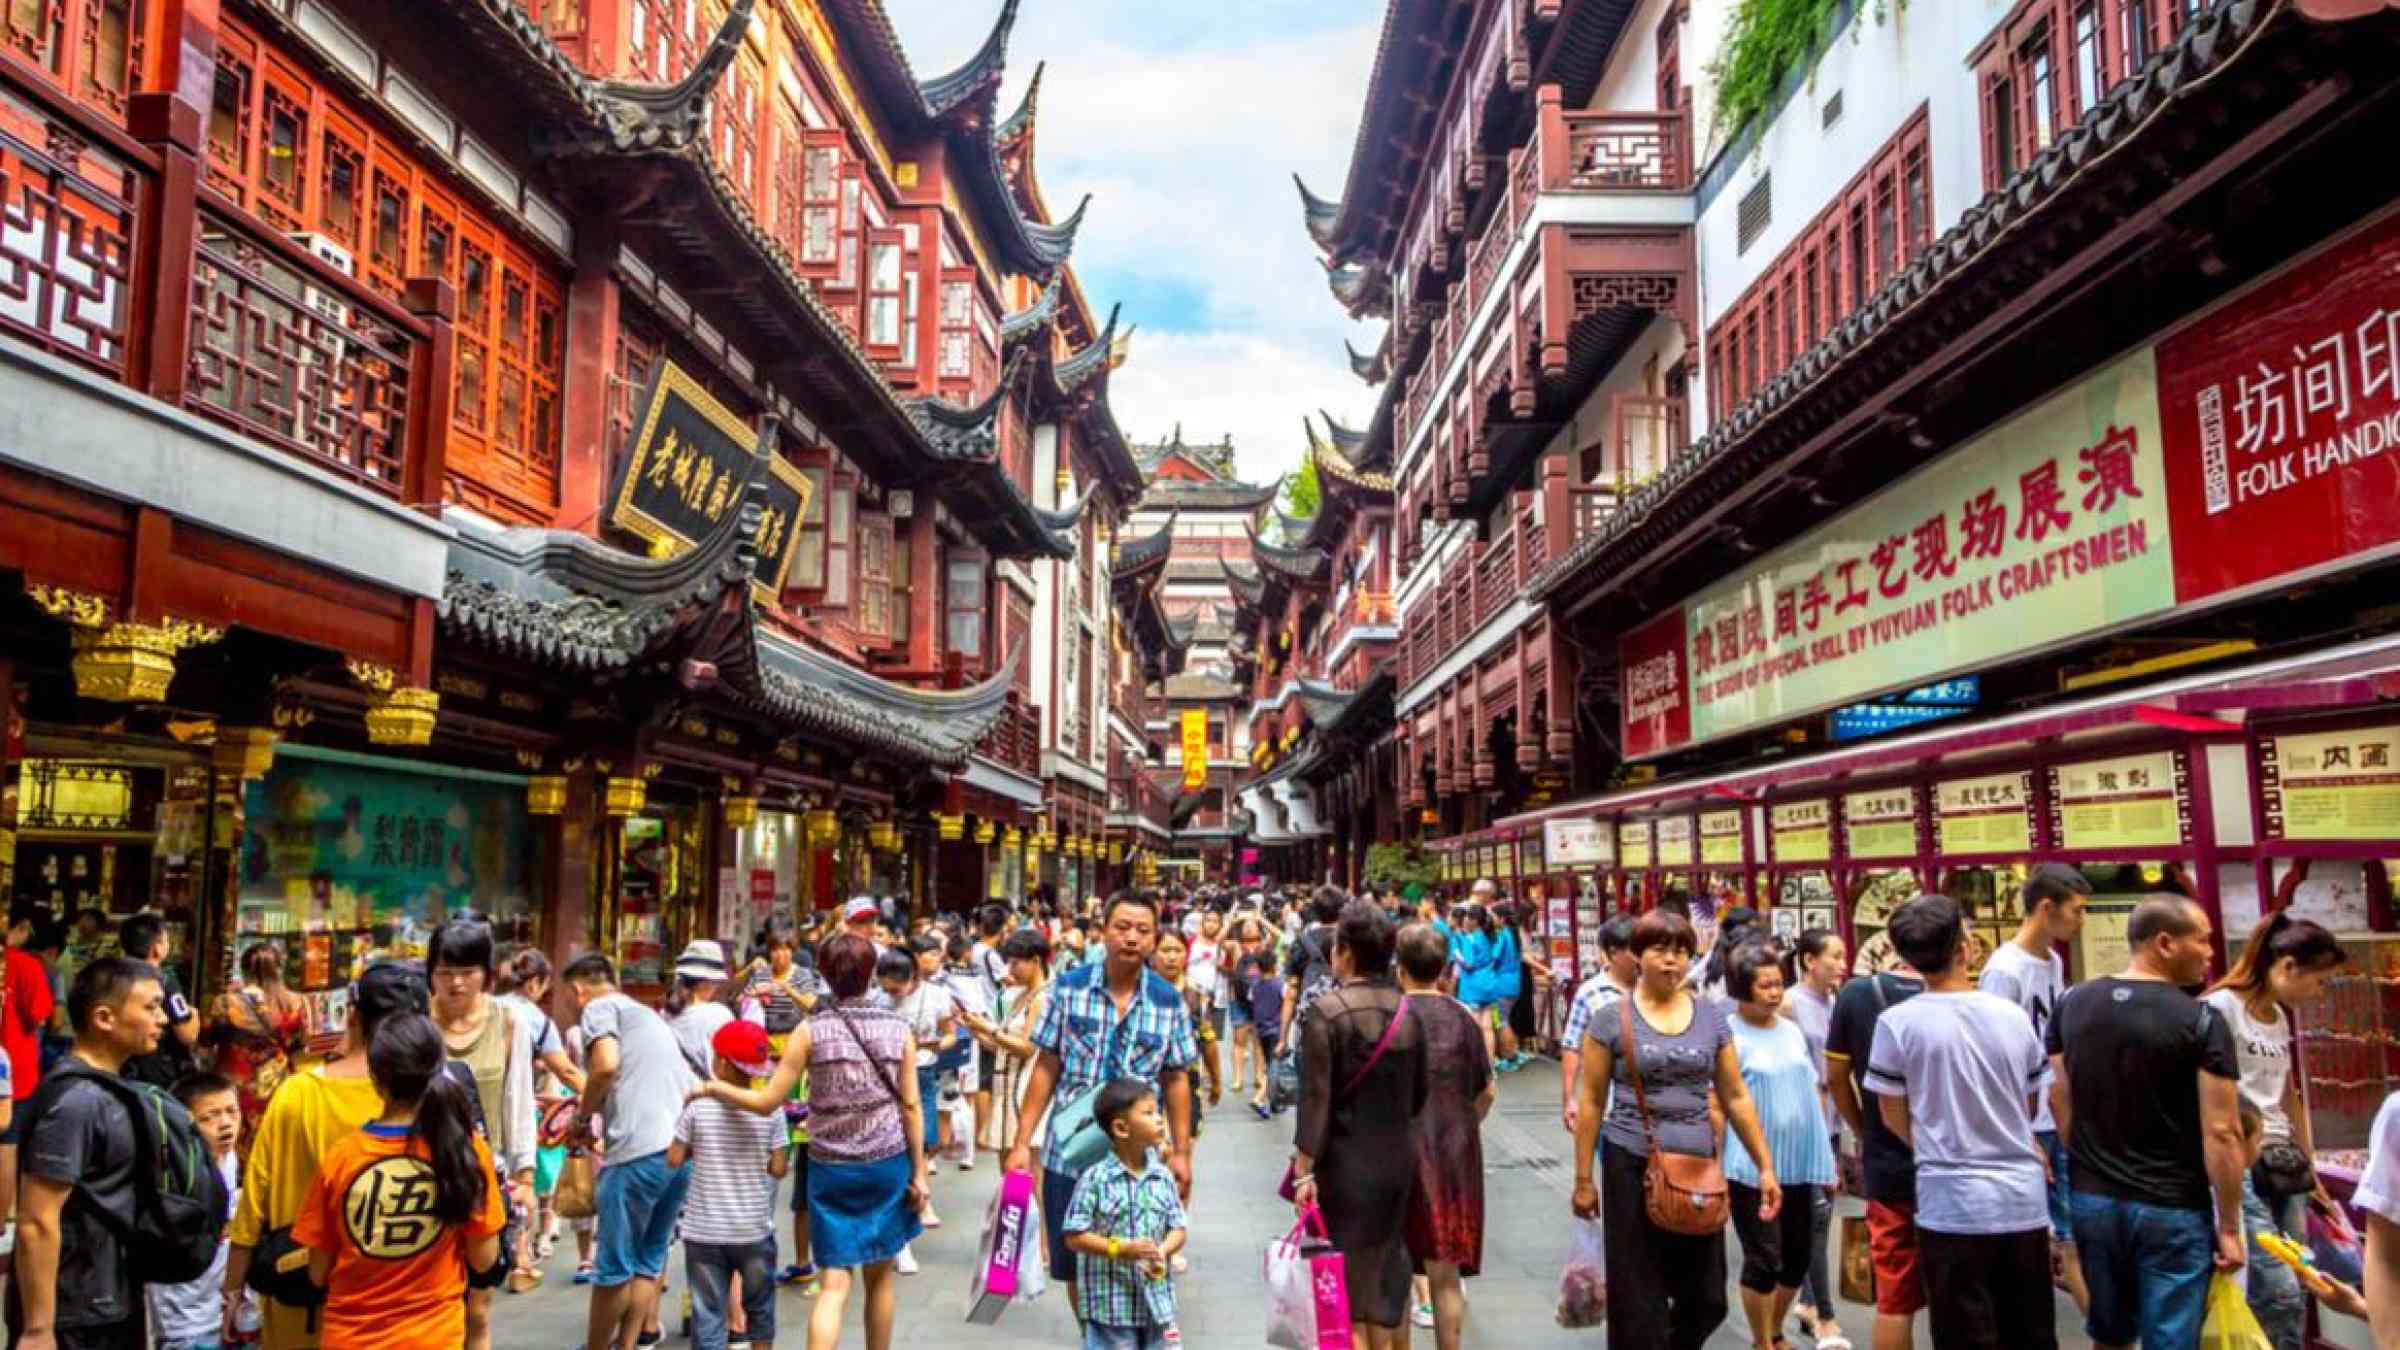 People in a street in Shanghai. LMspencer/Shutterstock